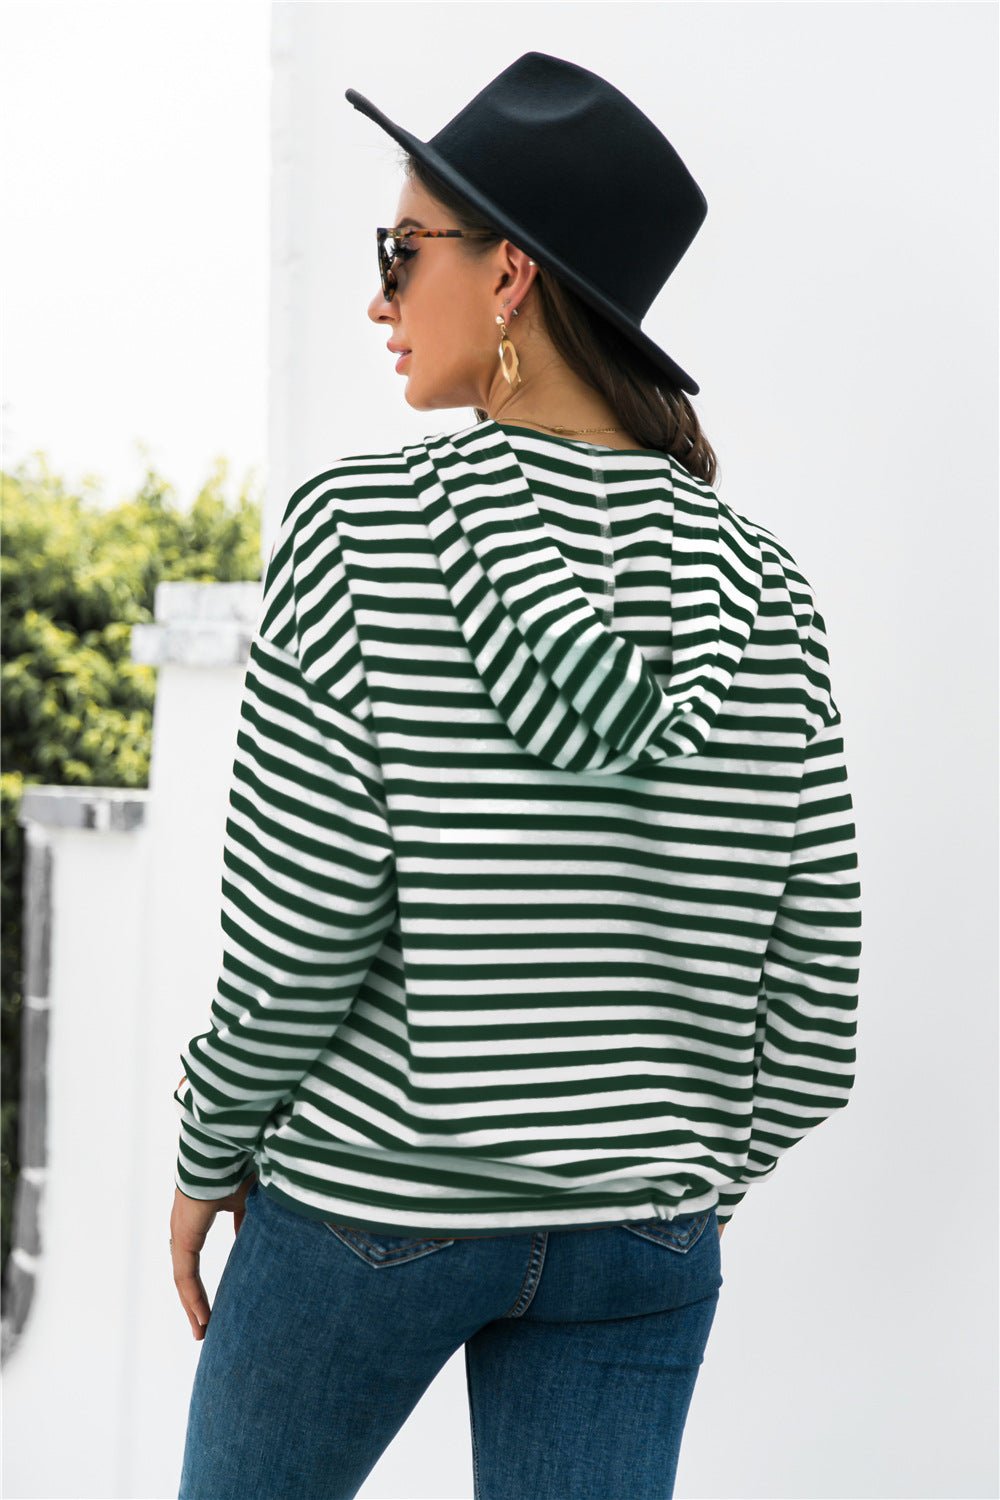 "Striped Half-Button Dropped Shoulder Hoodie - Wrap Yourself in Timeless Elegance and Comfort" - Guy Christopher 